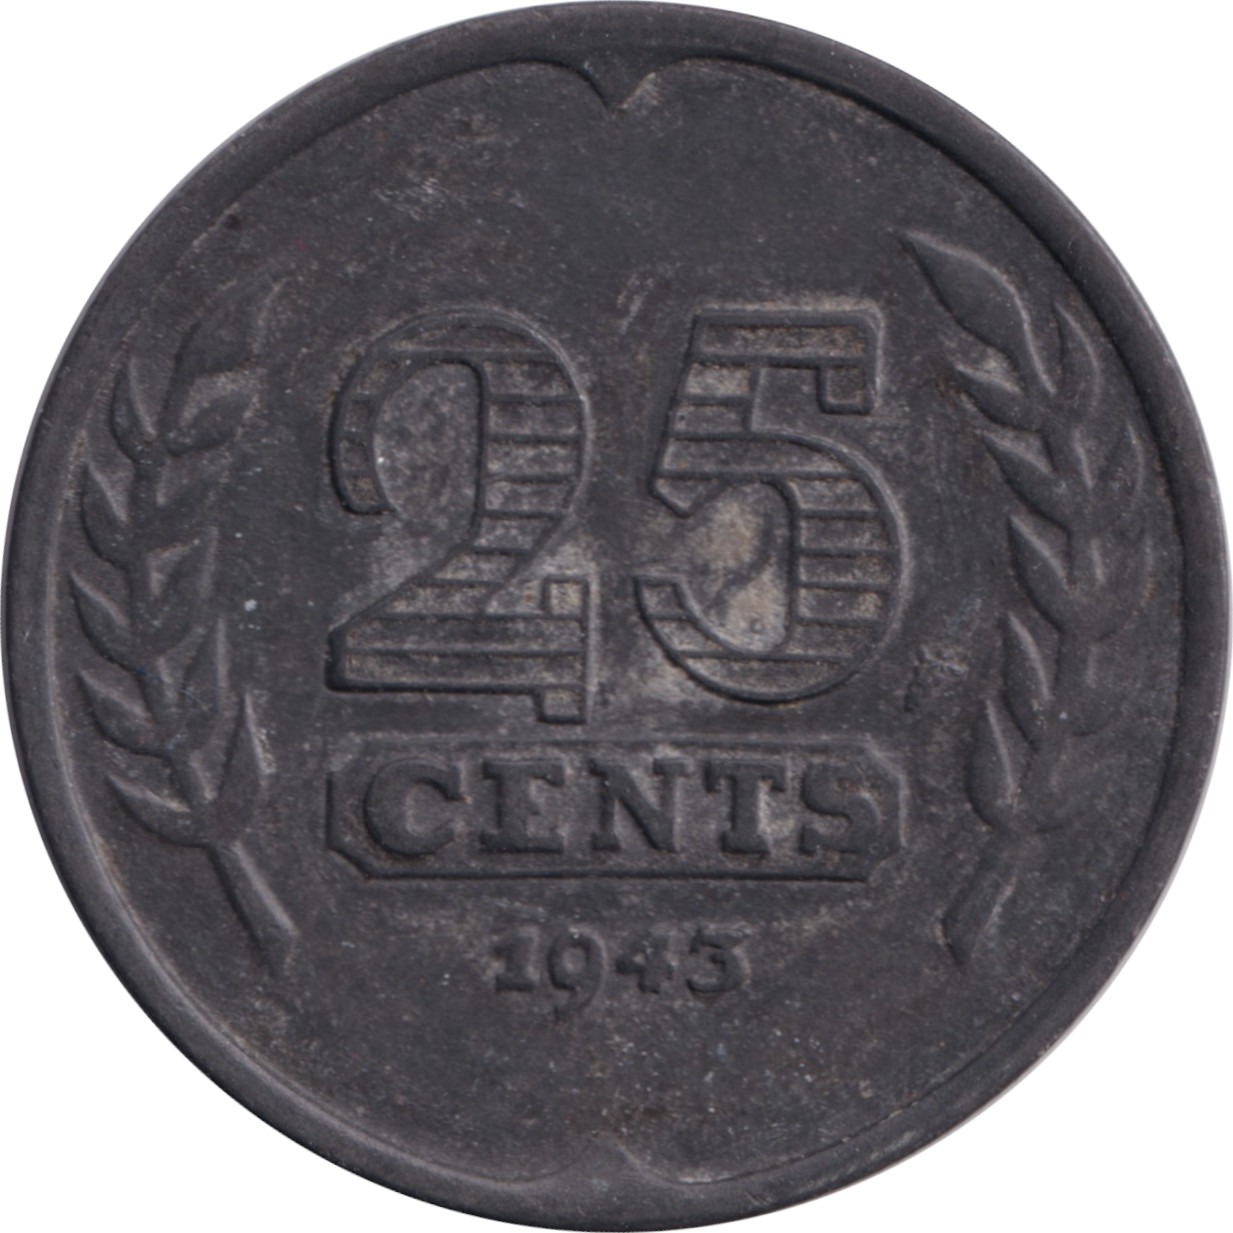 25 cents - Boat